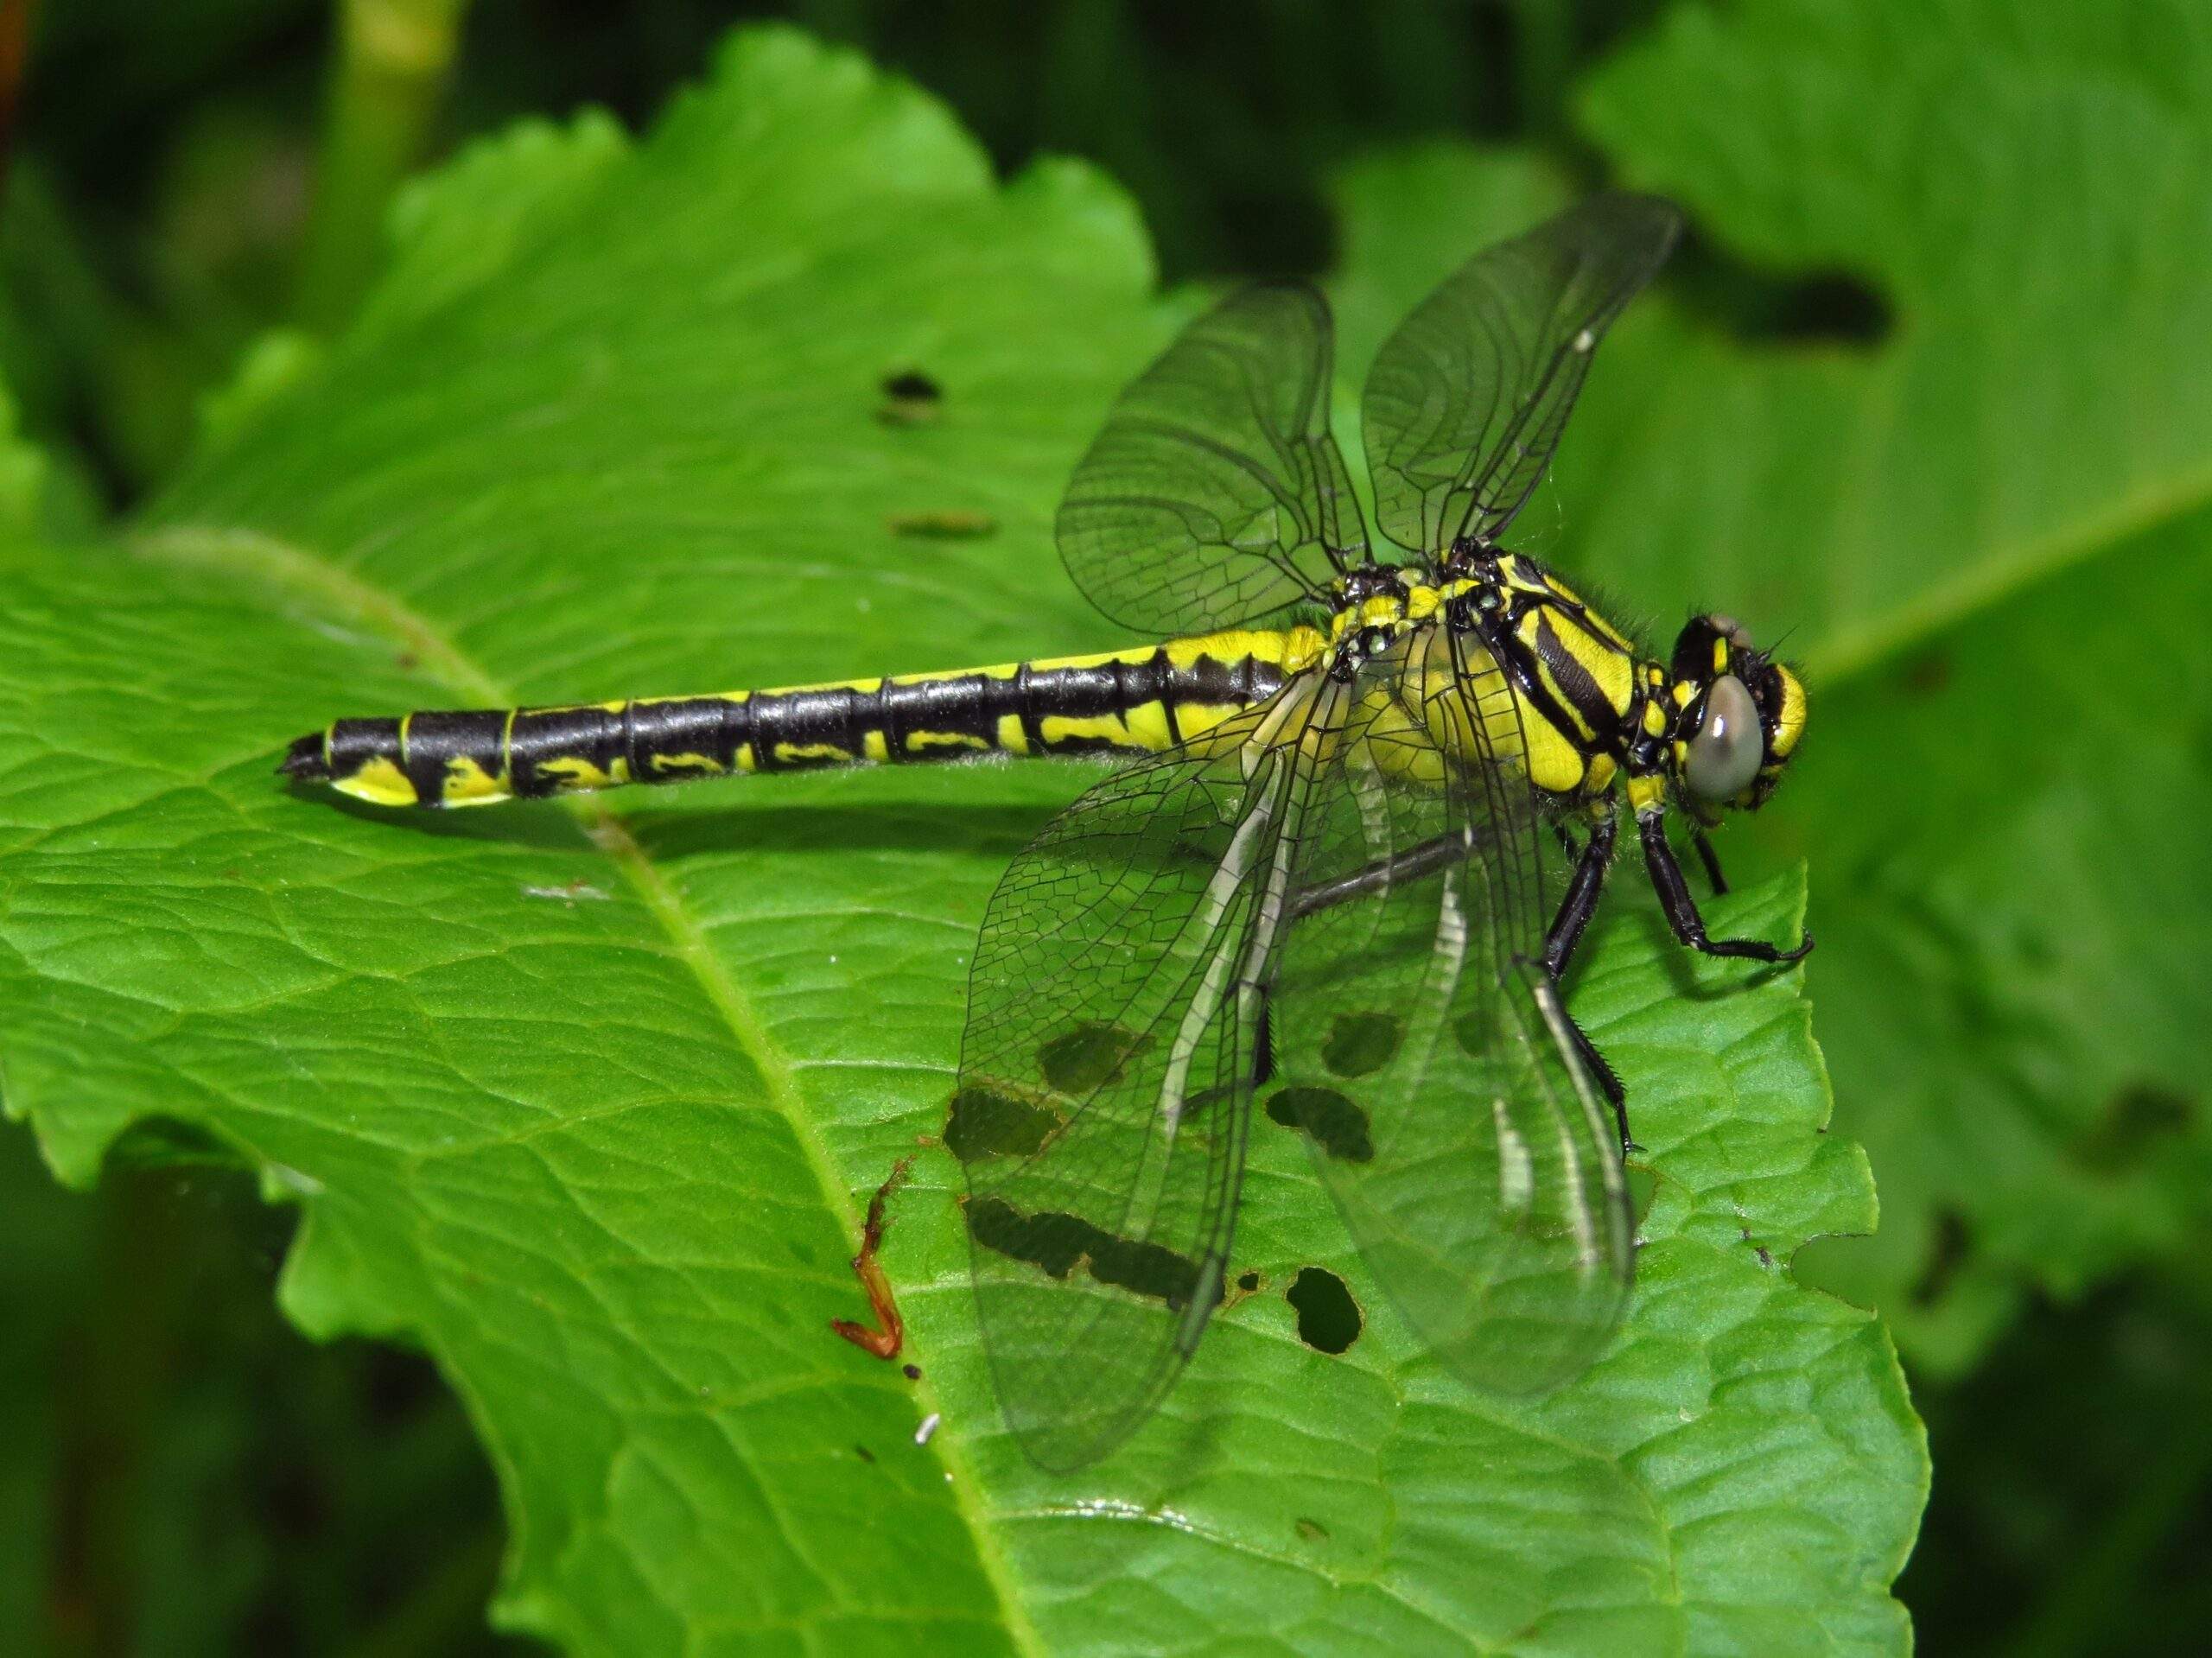 Club-tailed Dragonfly ♀ - Mike Averill